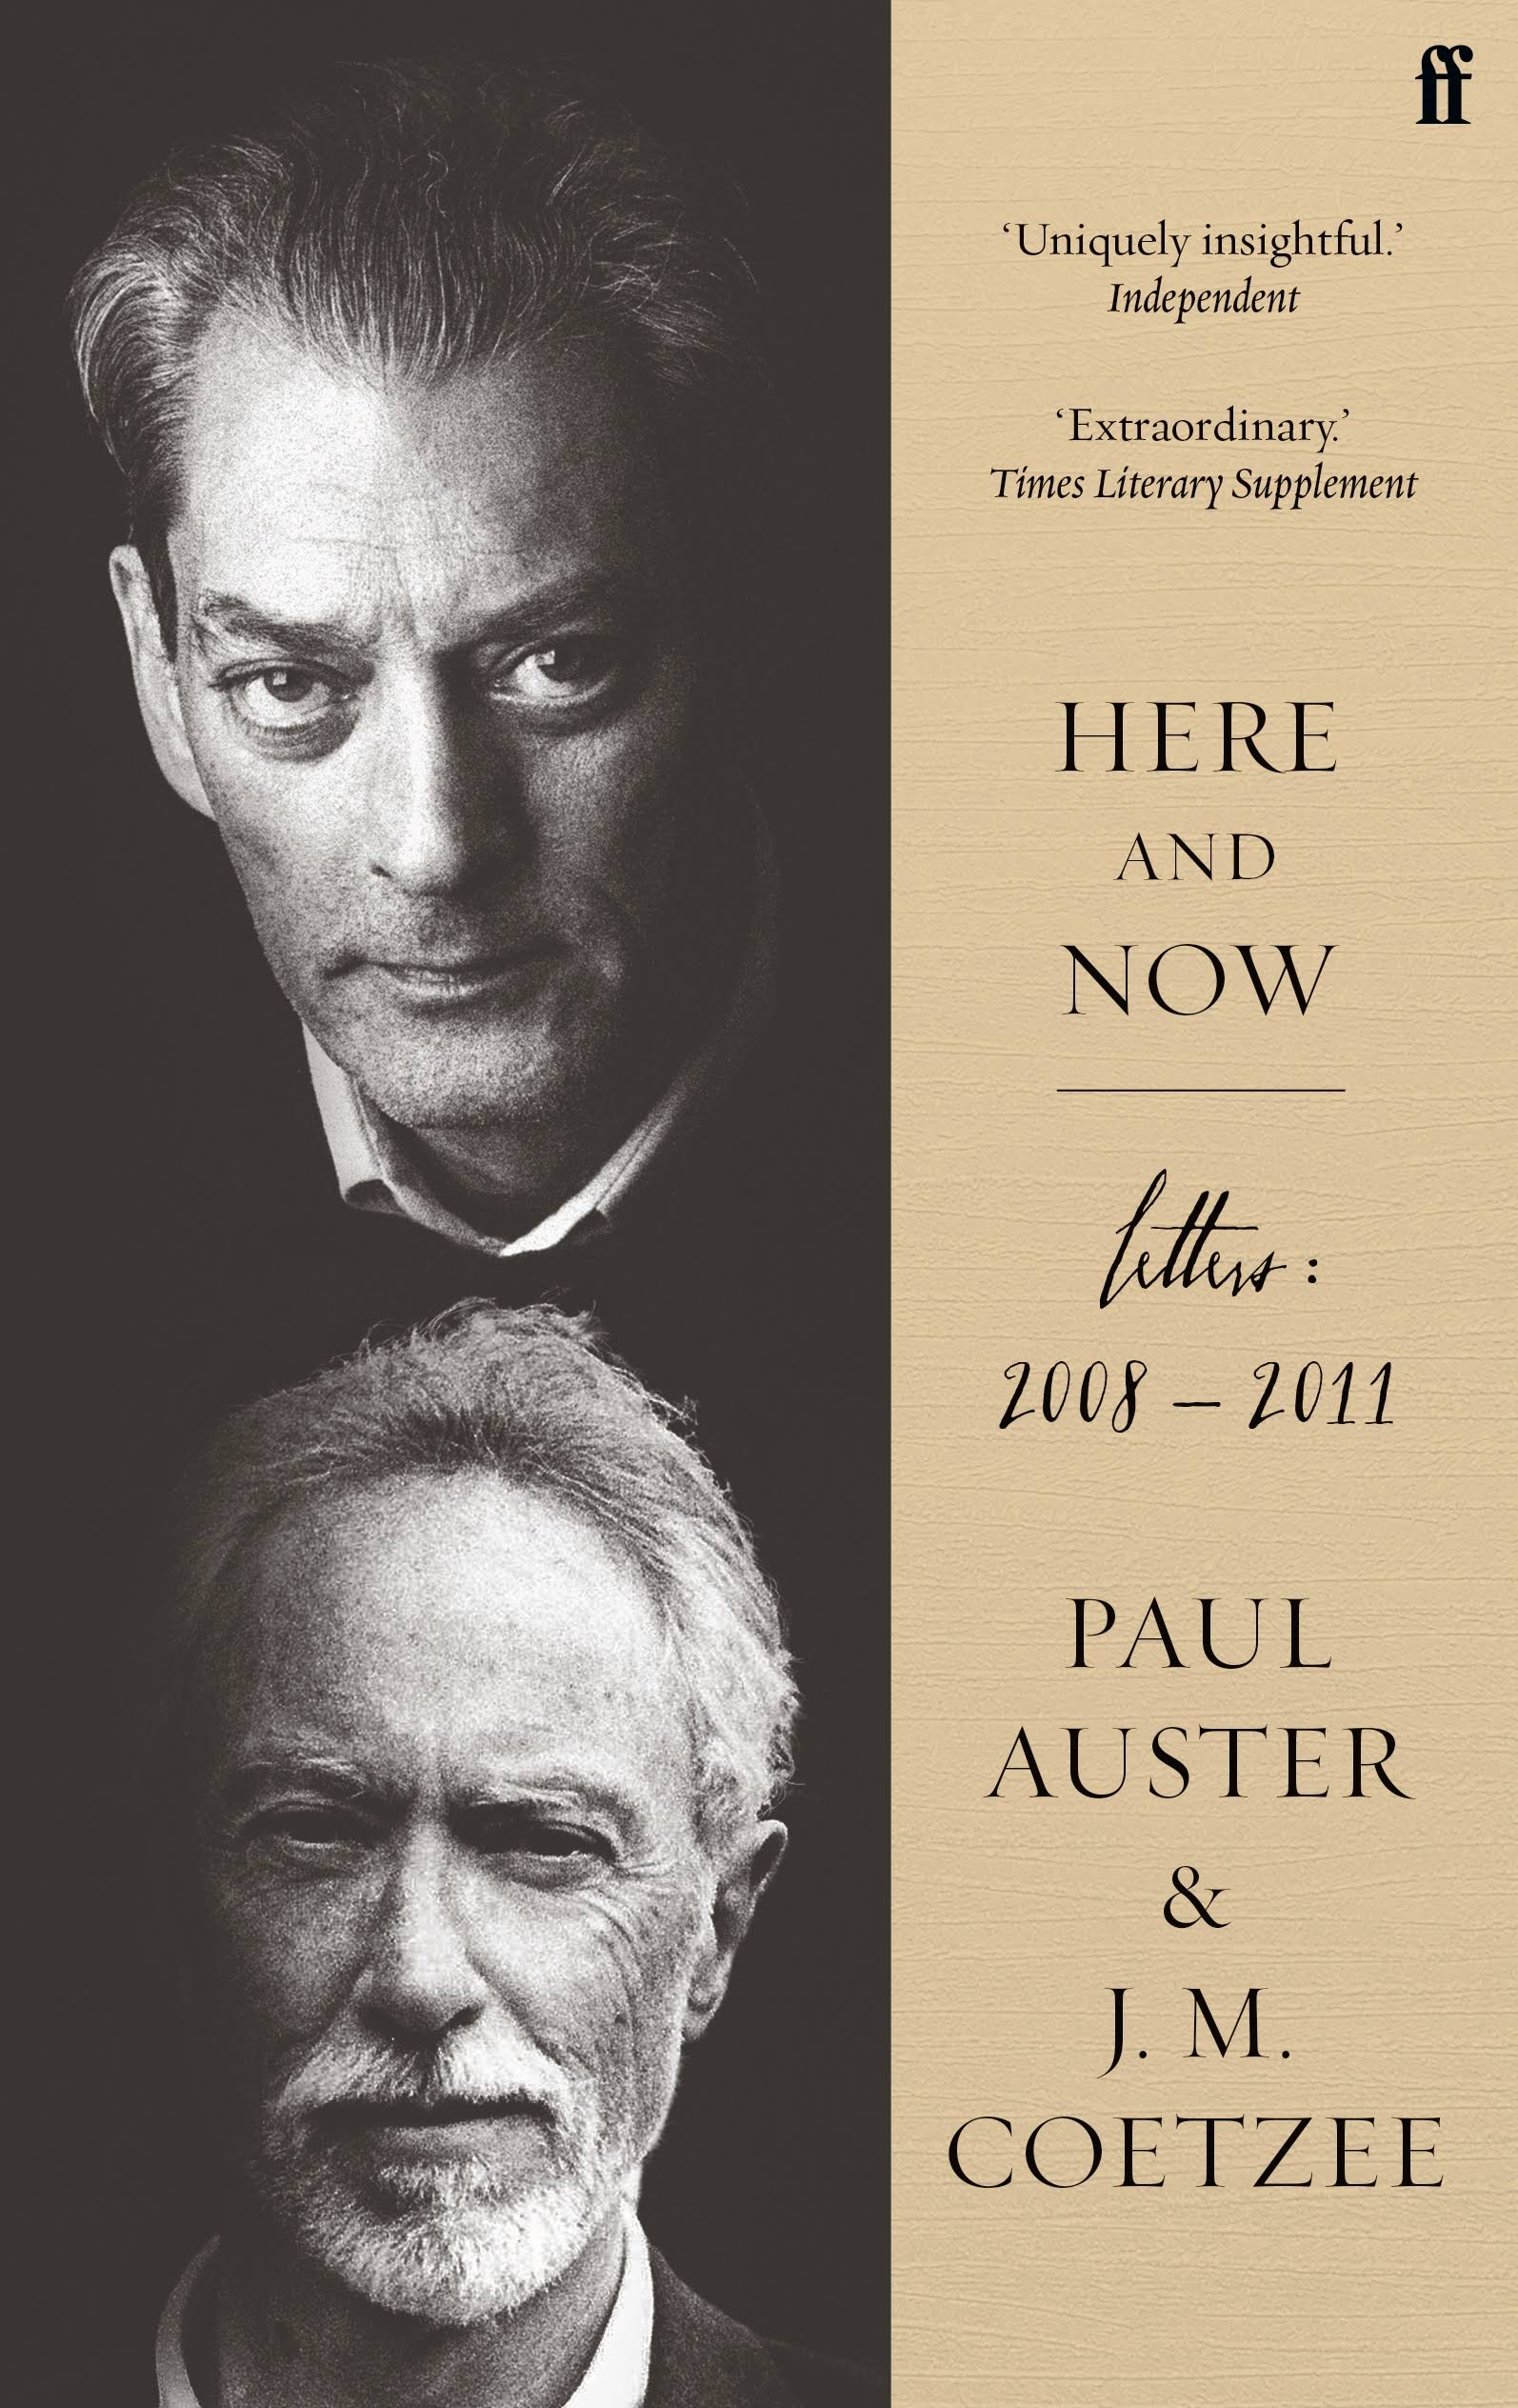 Here and Now [Book]